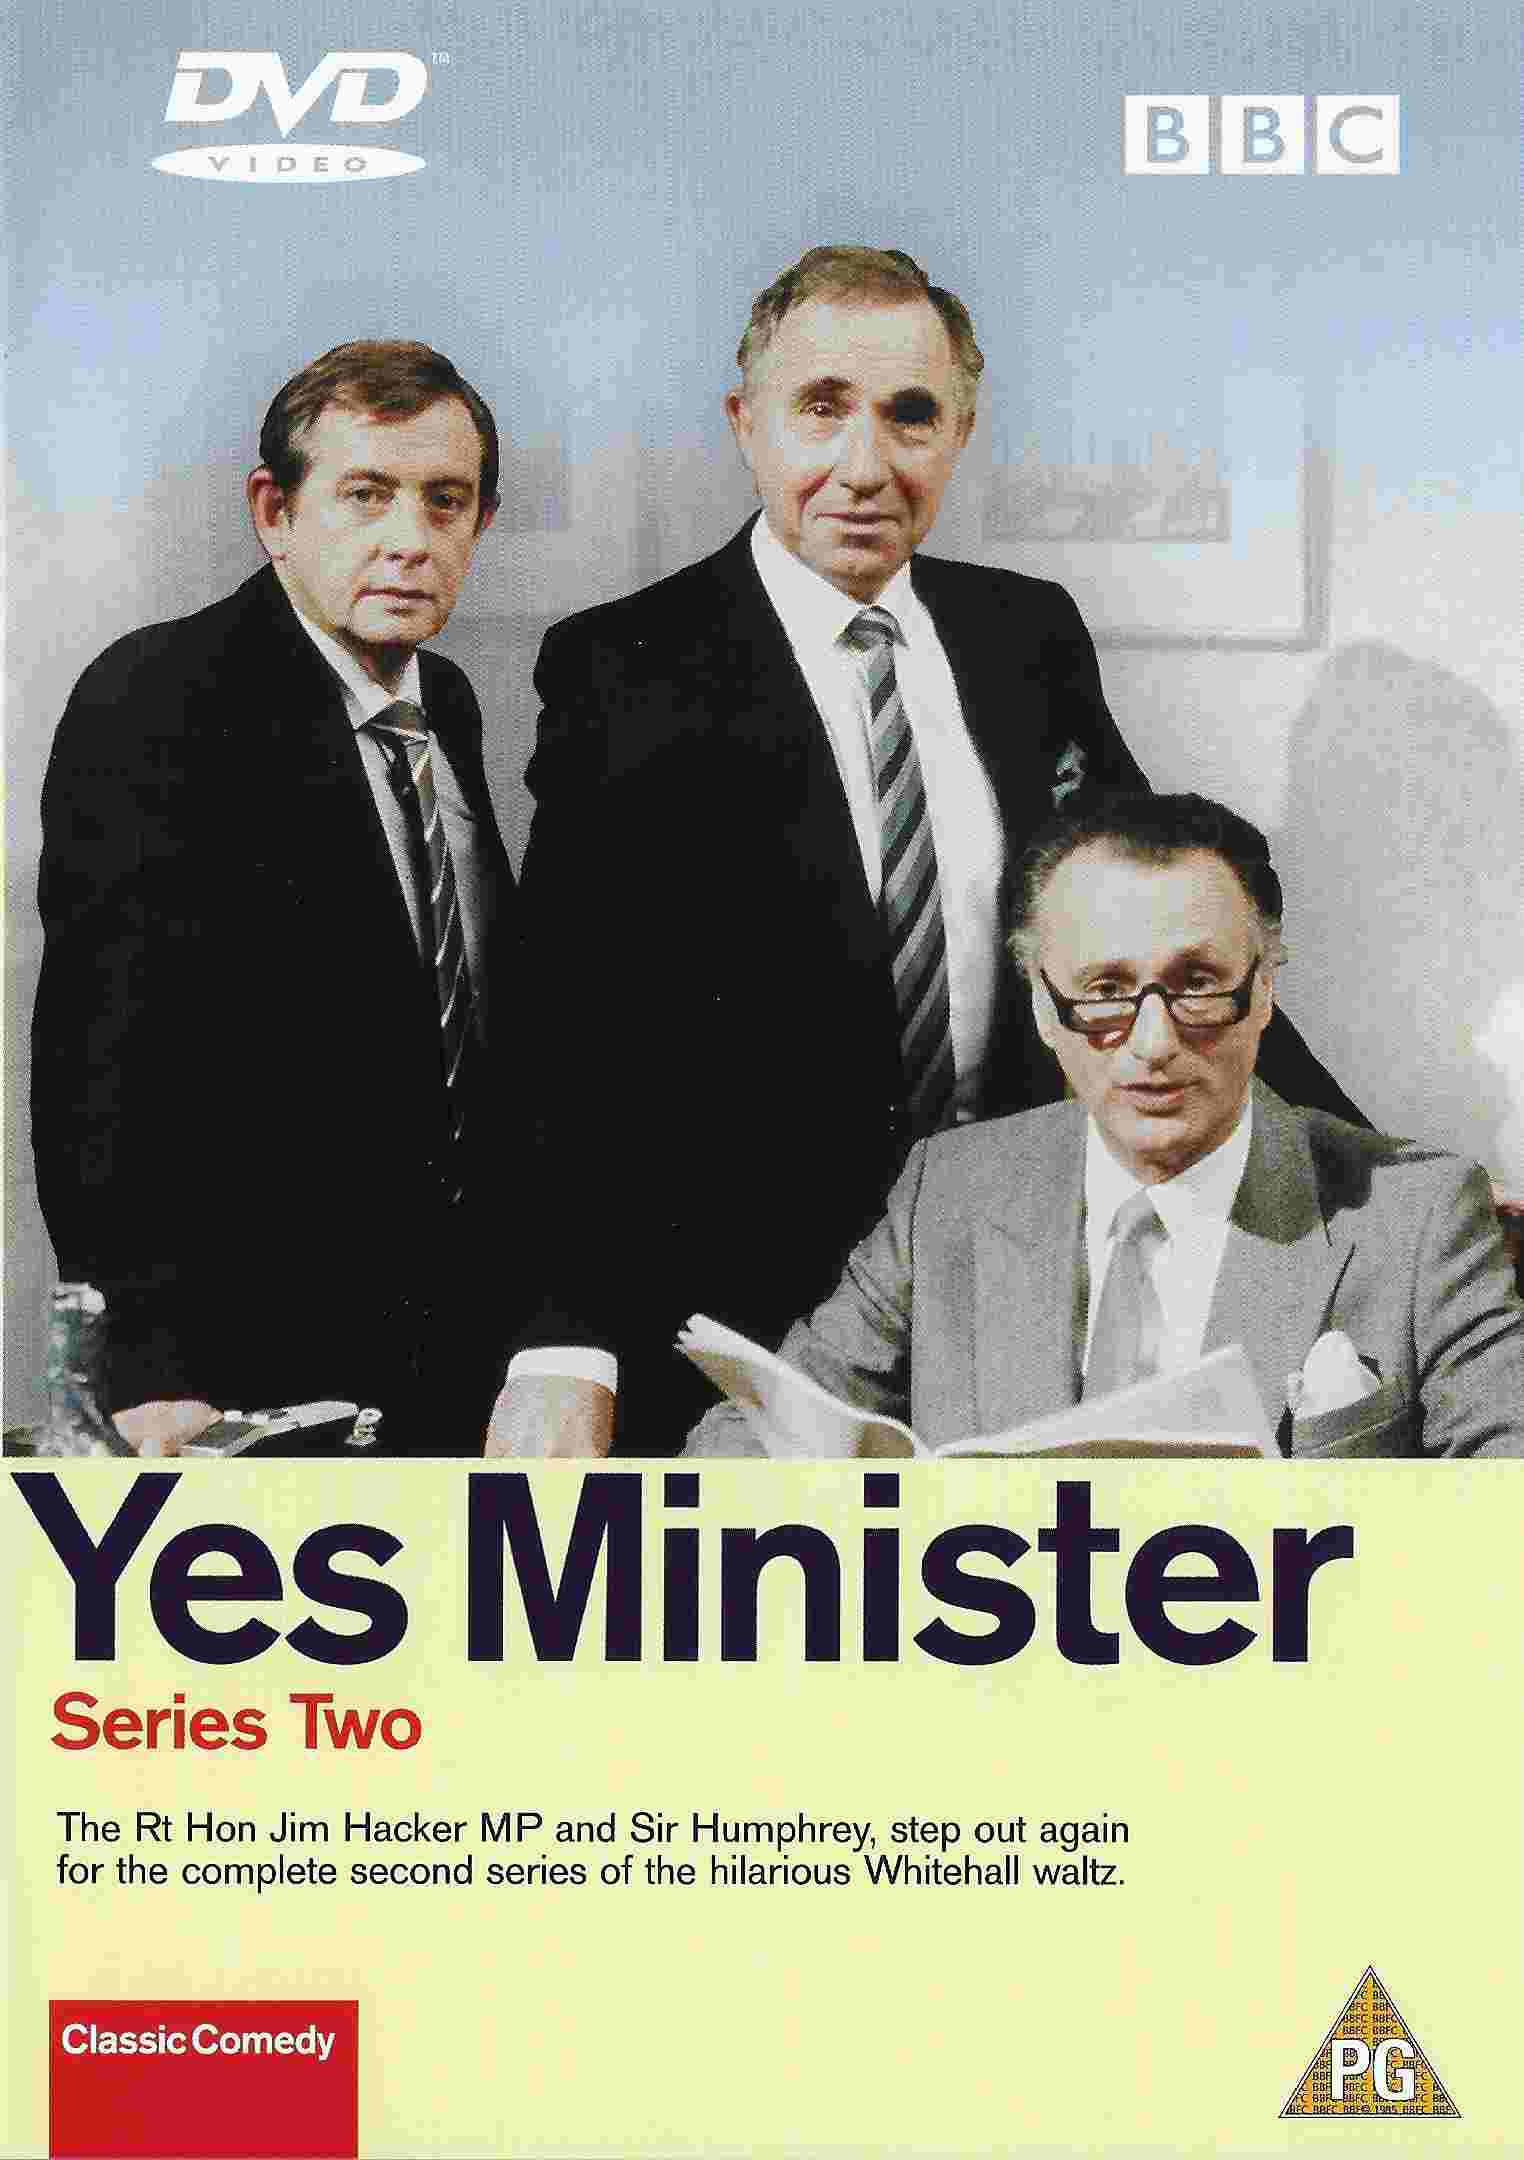 Picture of BBCDVD 1120 Yes Minister - Series Two by artist Antony Jay / Jonathan Lynn from the BBC records and Tapes library